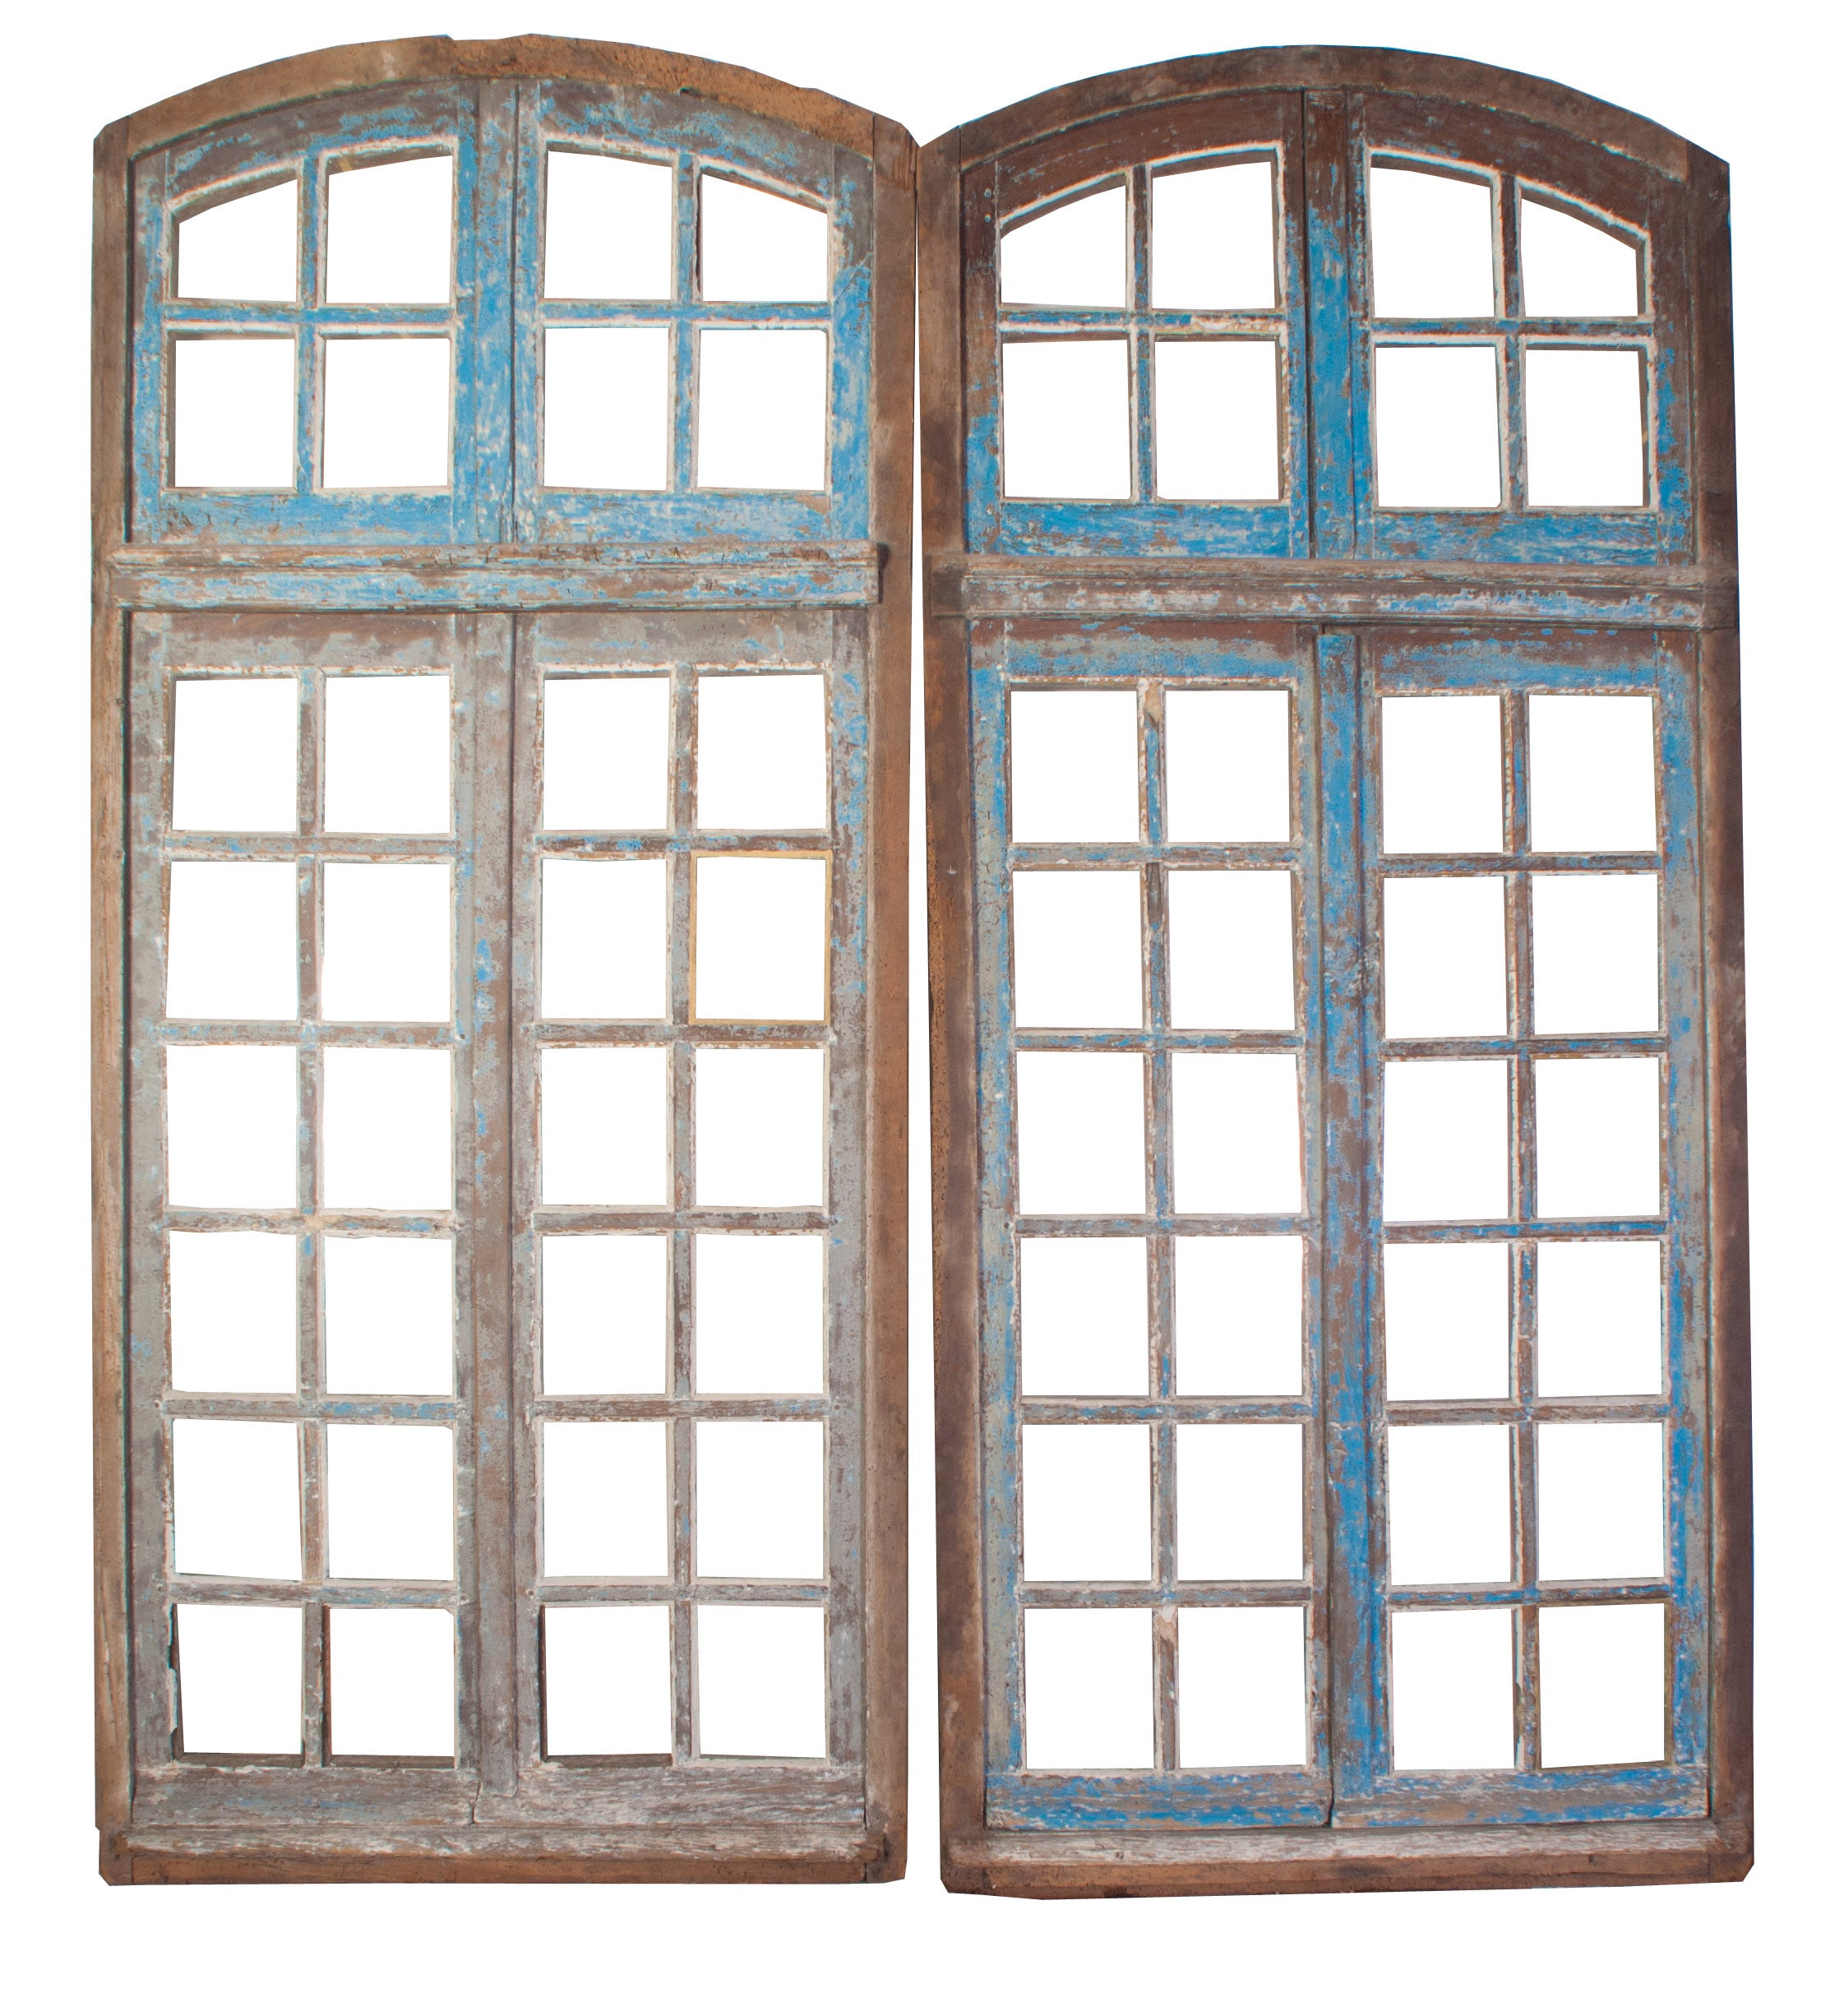 A Pair of Painted Windows